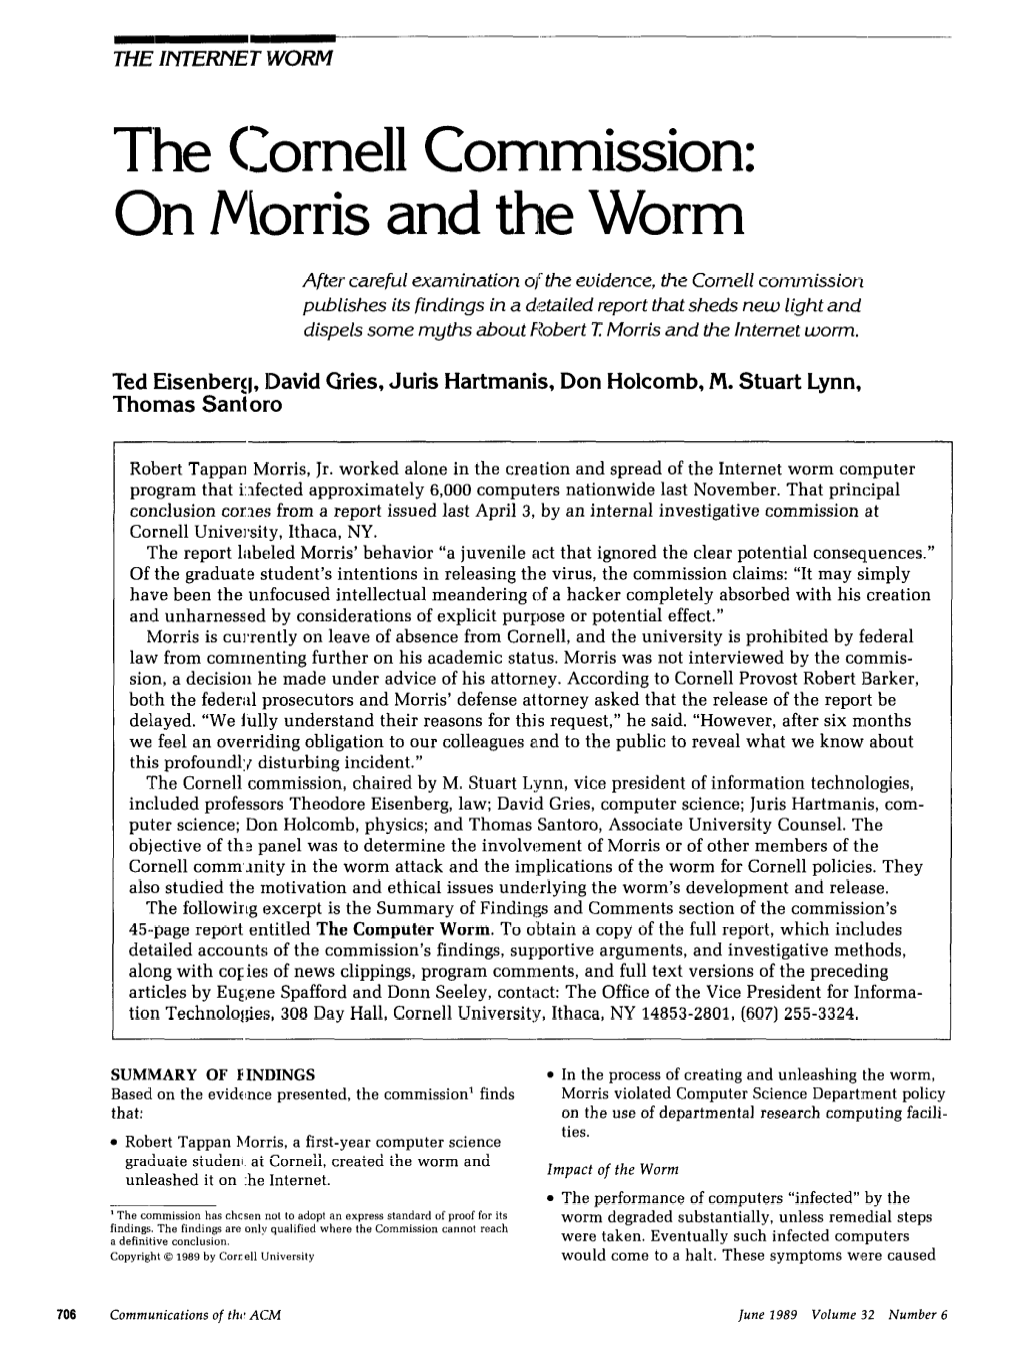 The Cornell Commission: on Morris and the Worm